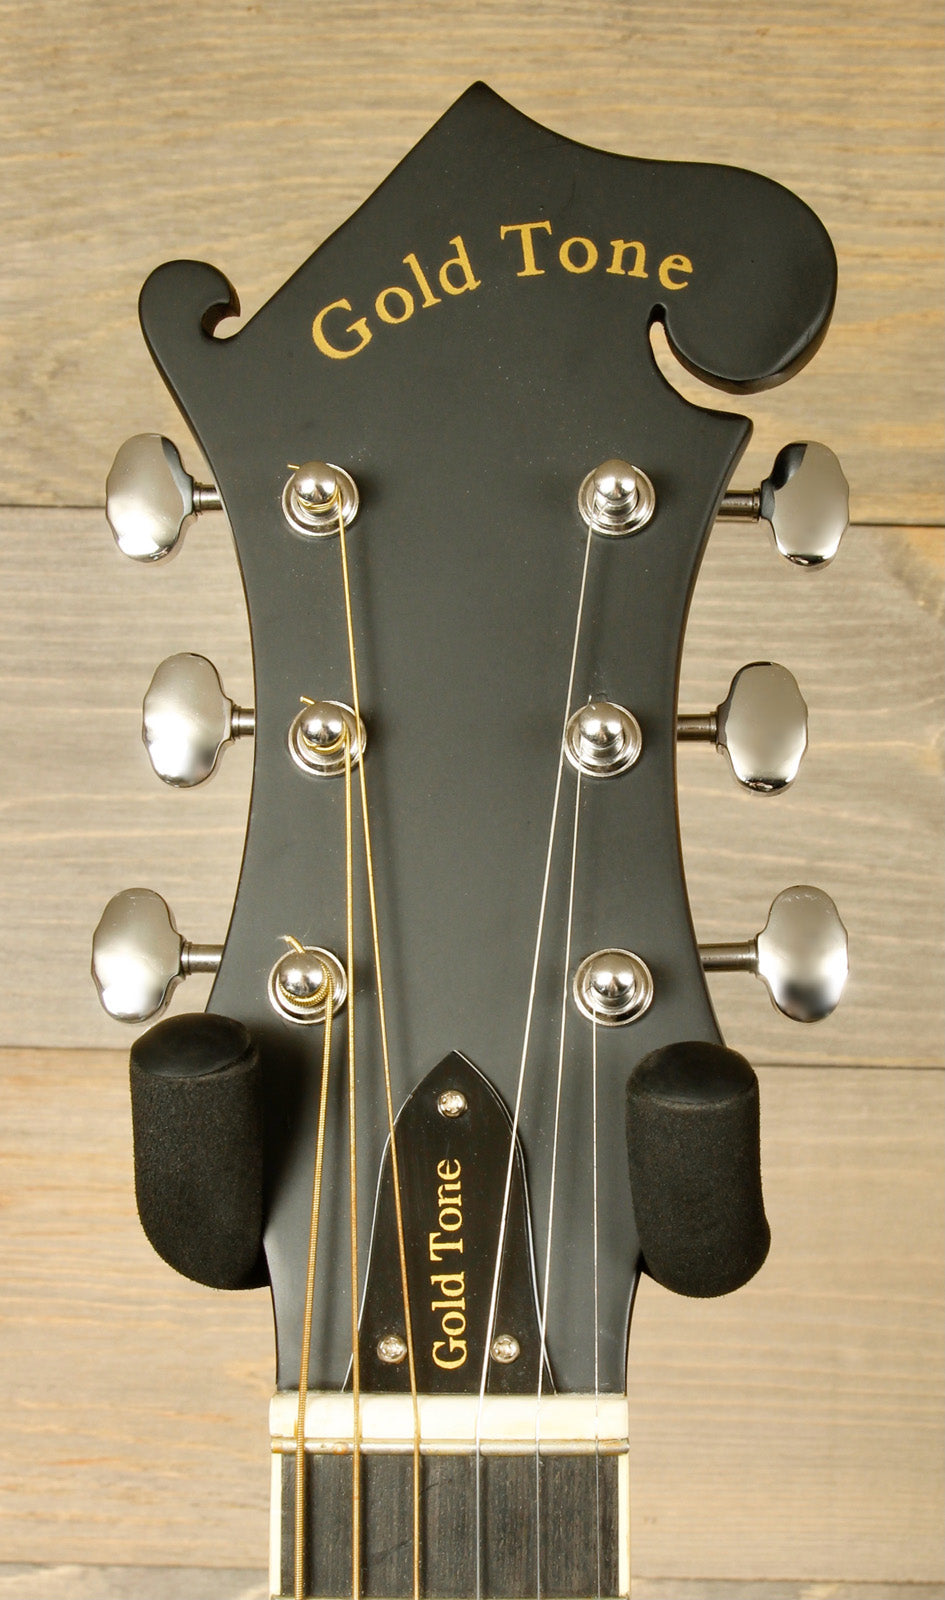 Gold Tone F-6 with Hard Bag (USED)